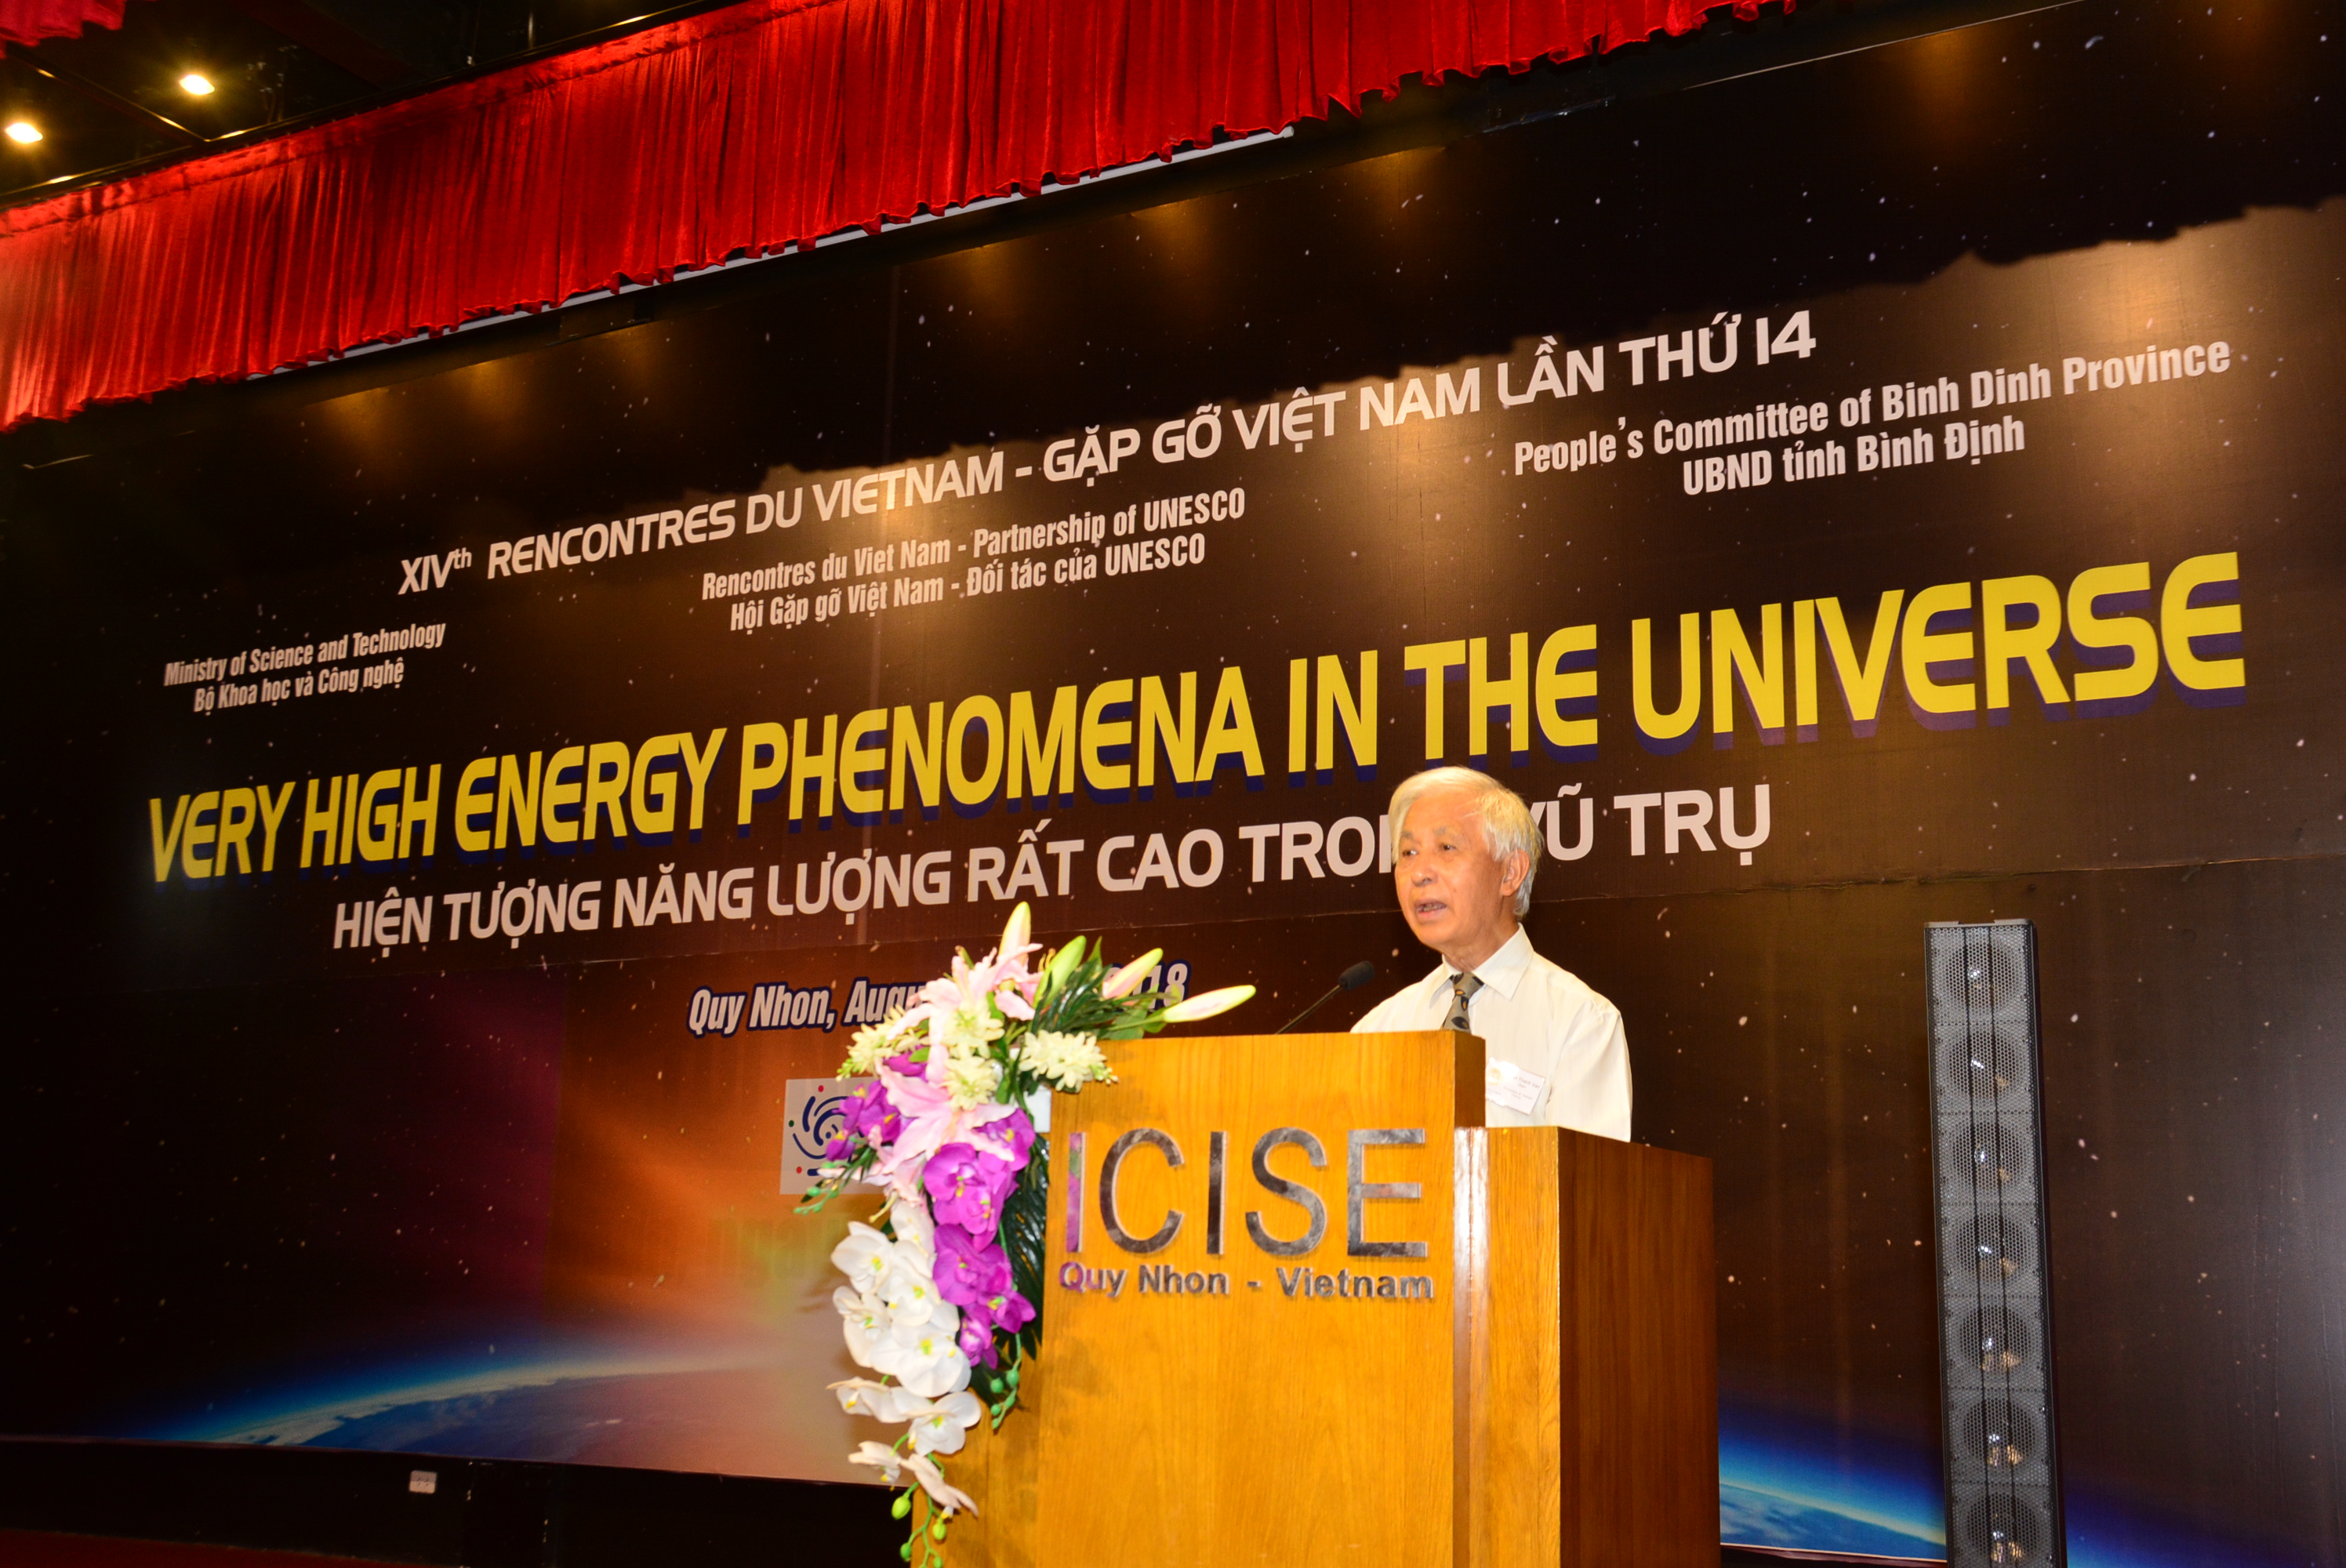 Meet the Vietnamese man dedicated to his country’s modern science growth